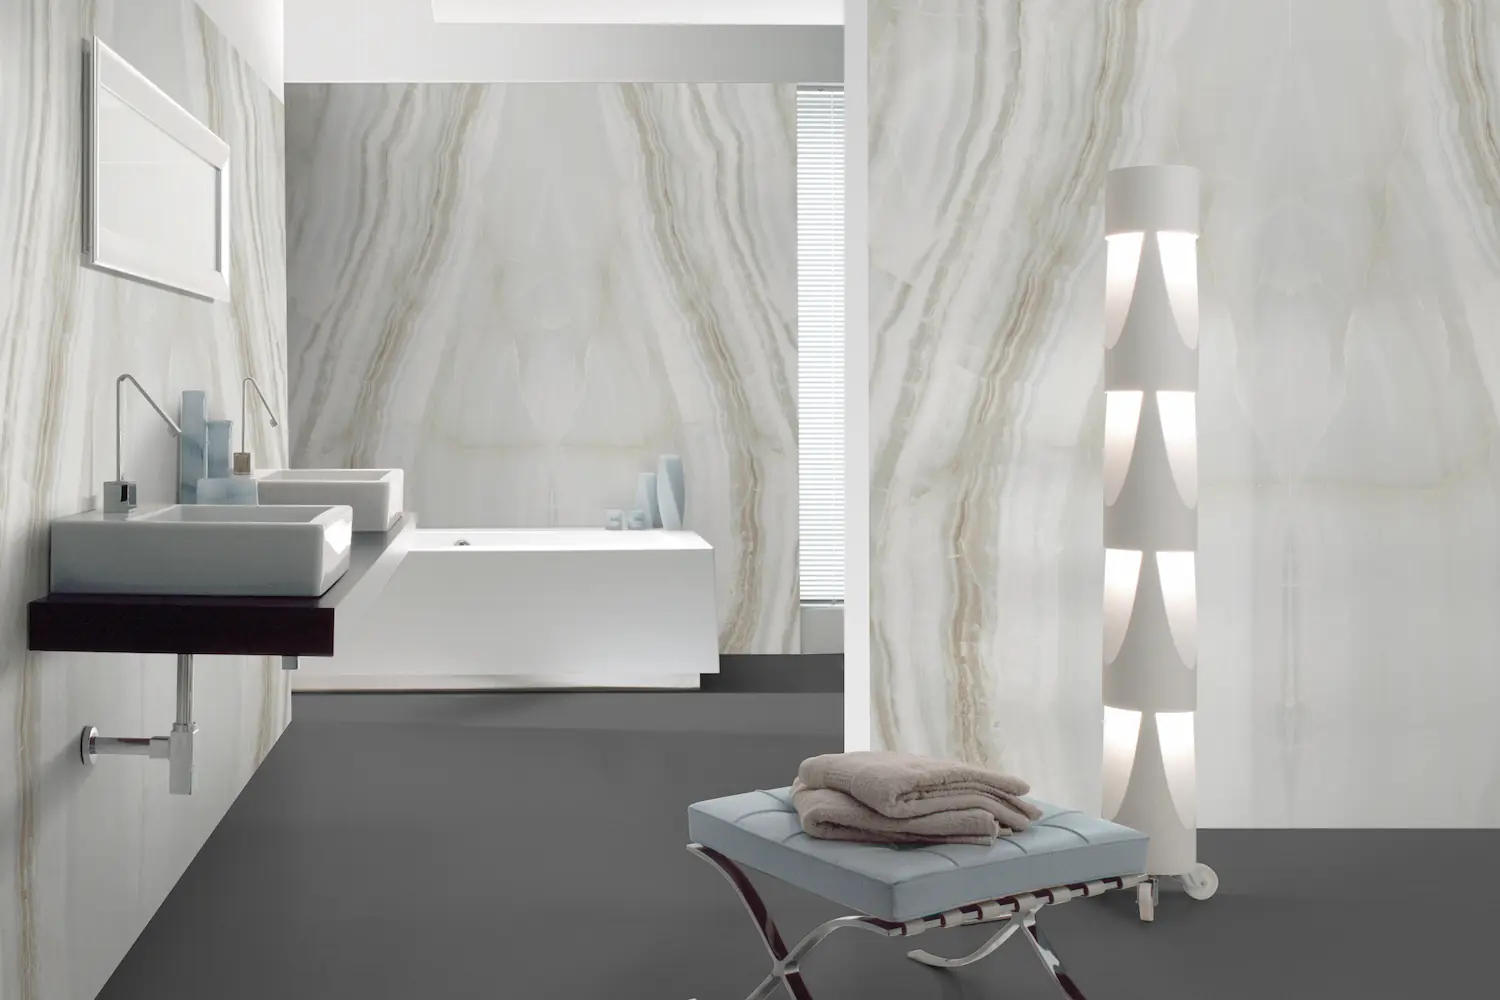 Onyx Wave FORTE Porcelain countertops by Francini